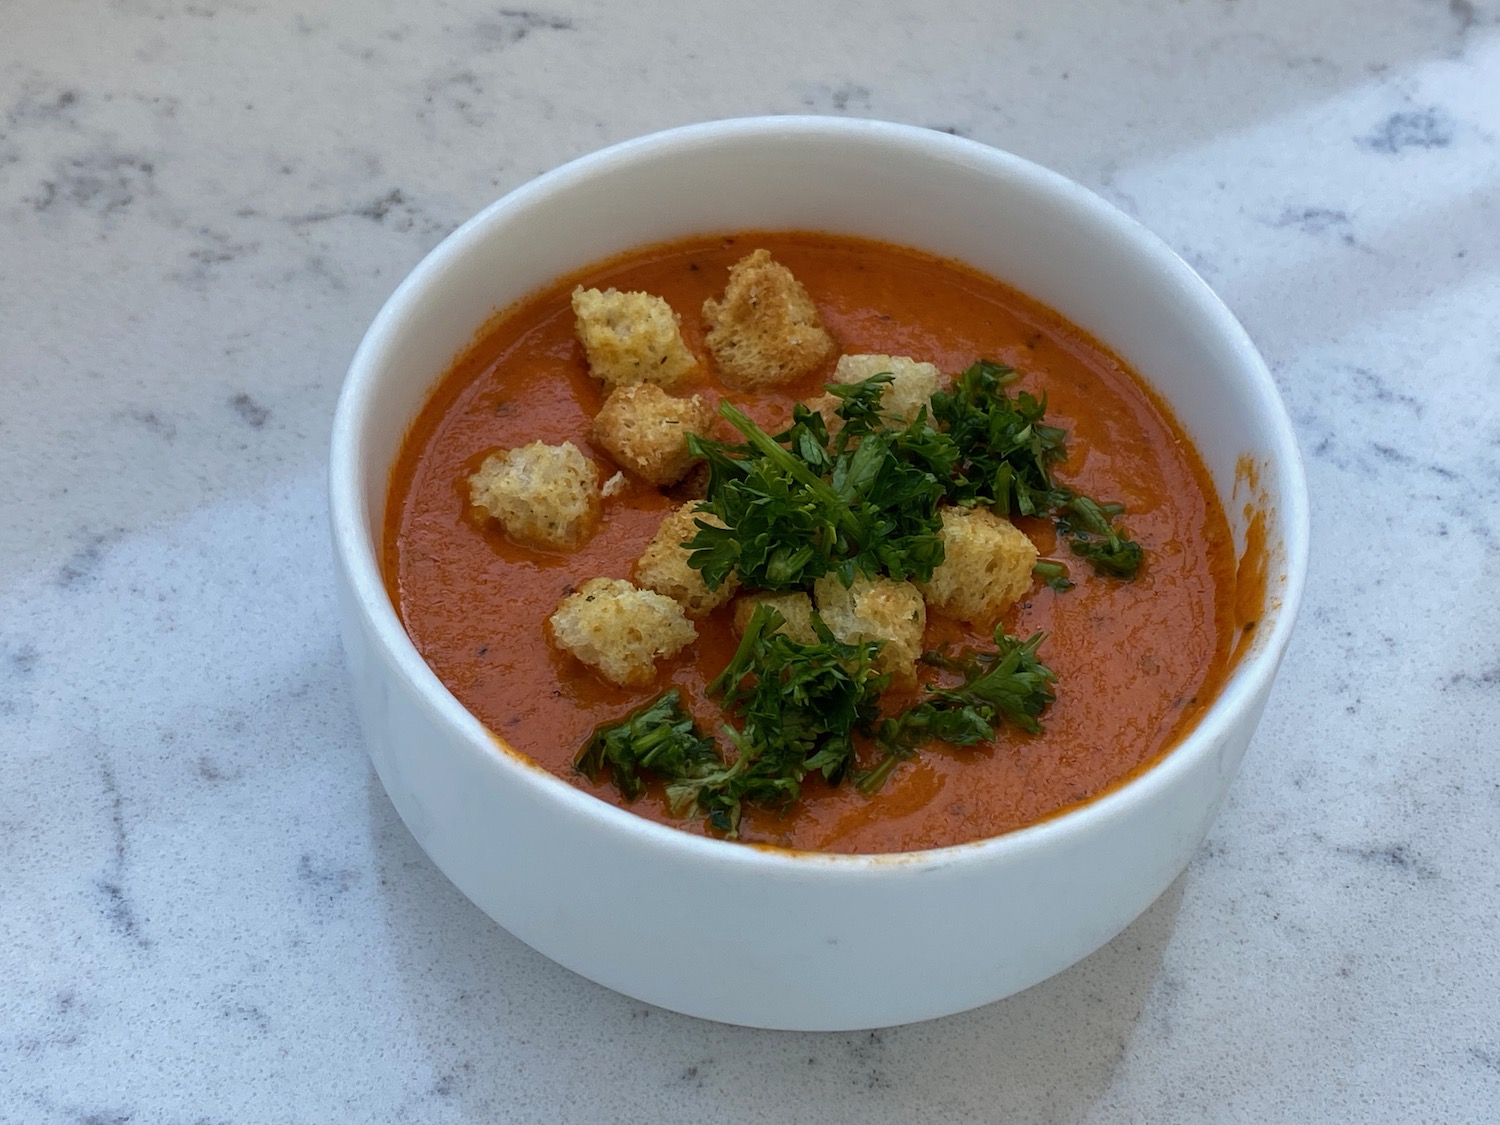 a bowl of soup with croutons and parsley